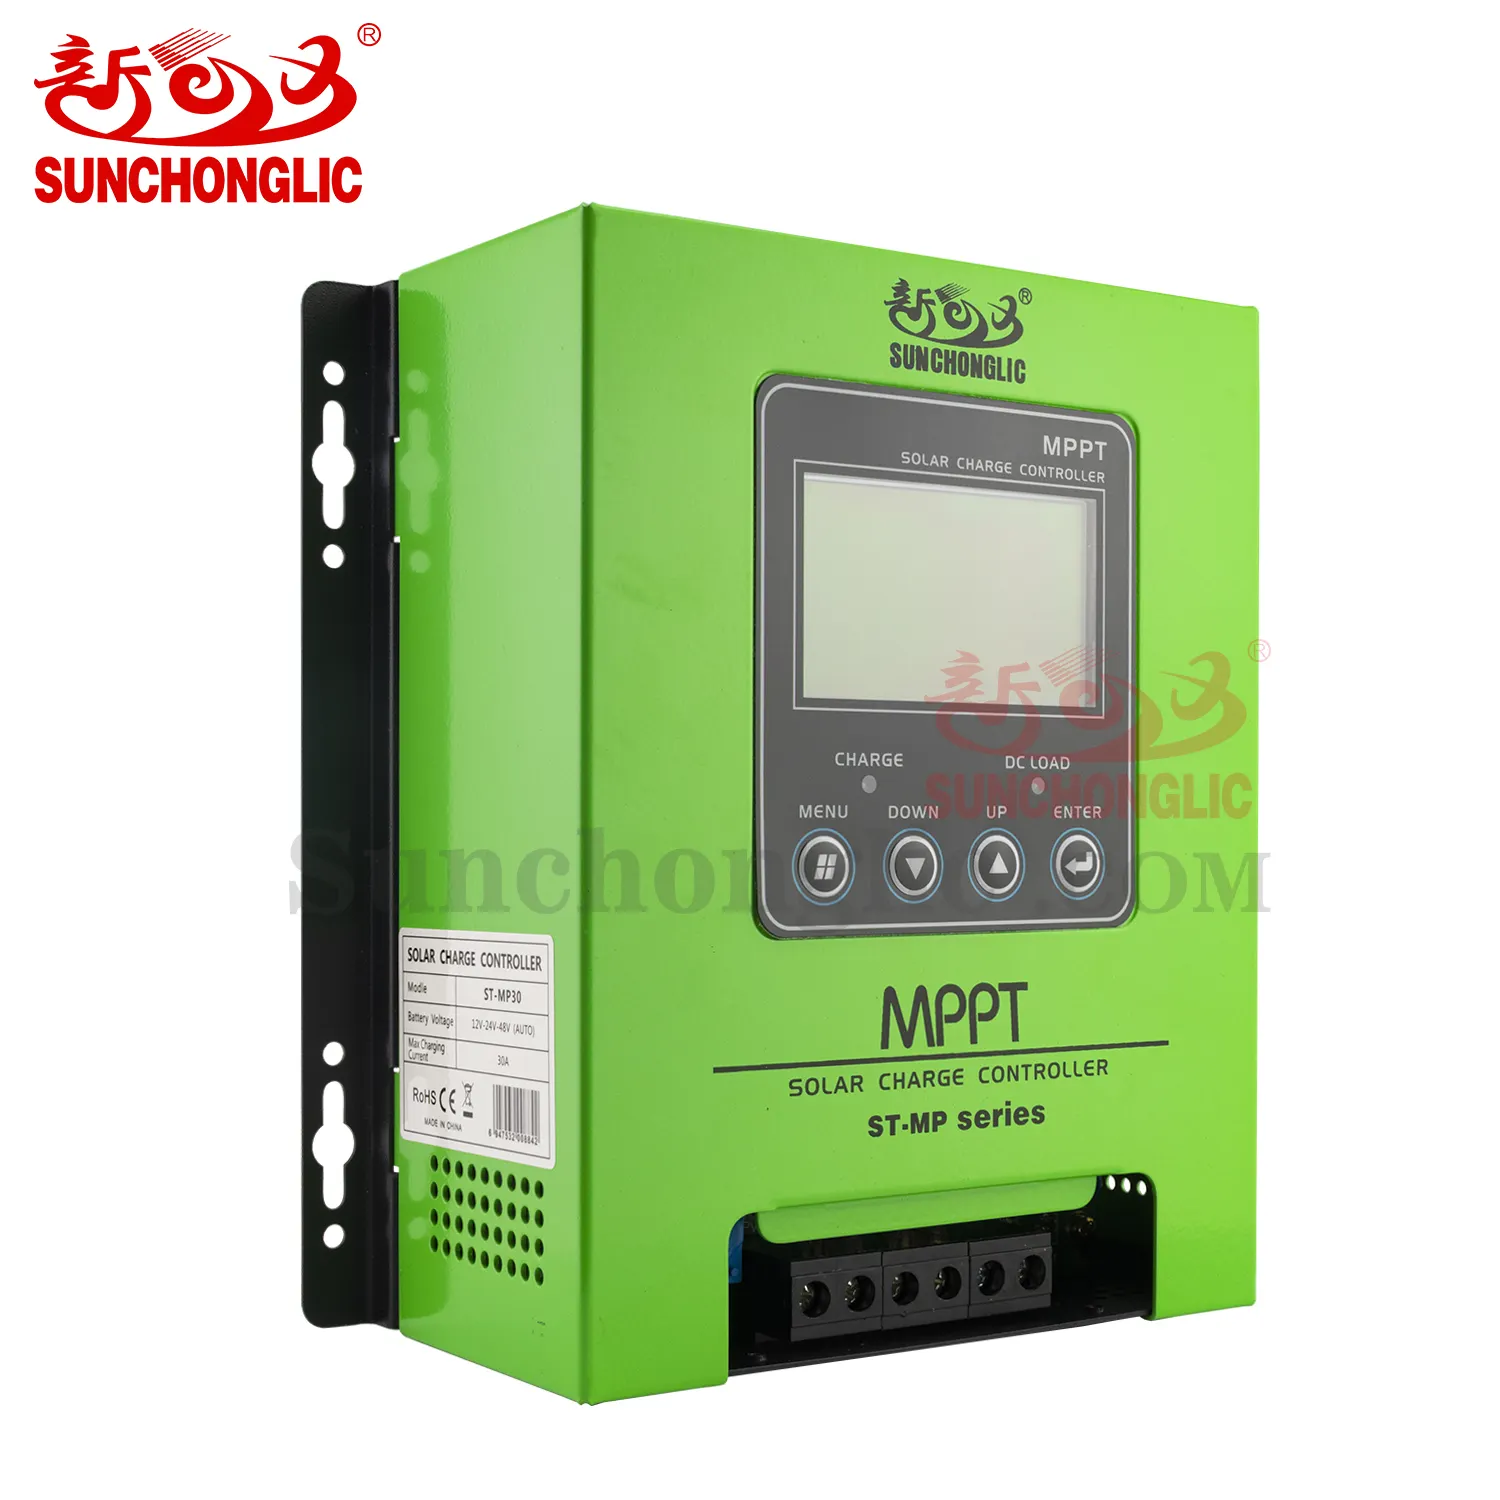 12v Solar Panel Charge Controller Wholesales Sunchonglic MPPT 12V/24V/48V 30A Solar Panel Solar Charge Controller For Solar System